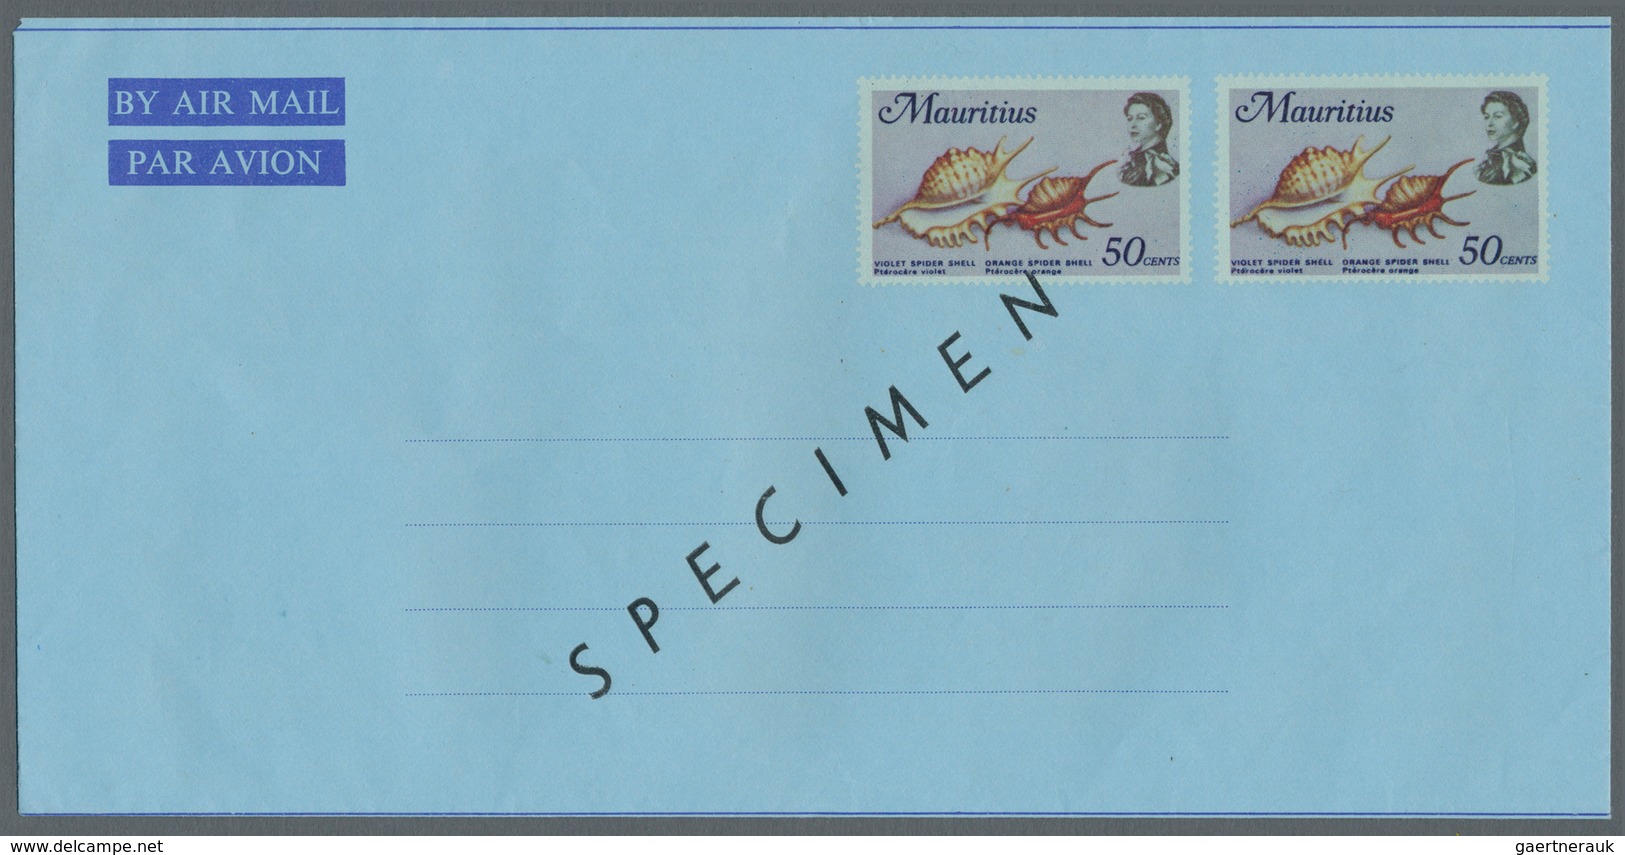 23651 Mauritius: 1947/1999 (ca.), AEROGRAMMES: accumulation with about 900 unused and used/CTO airletters